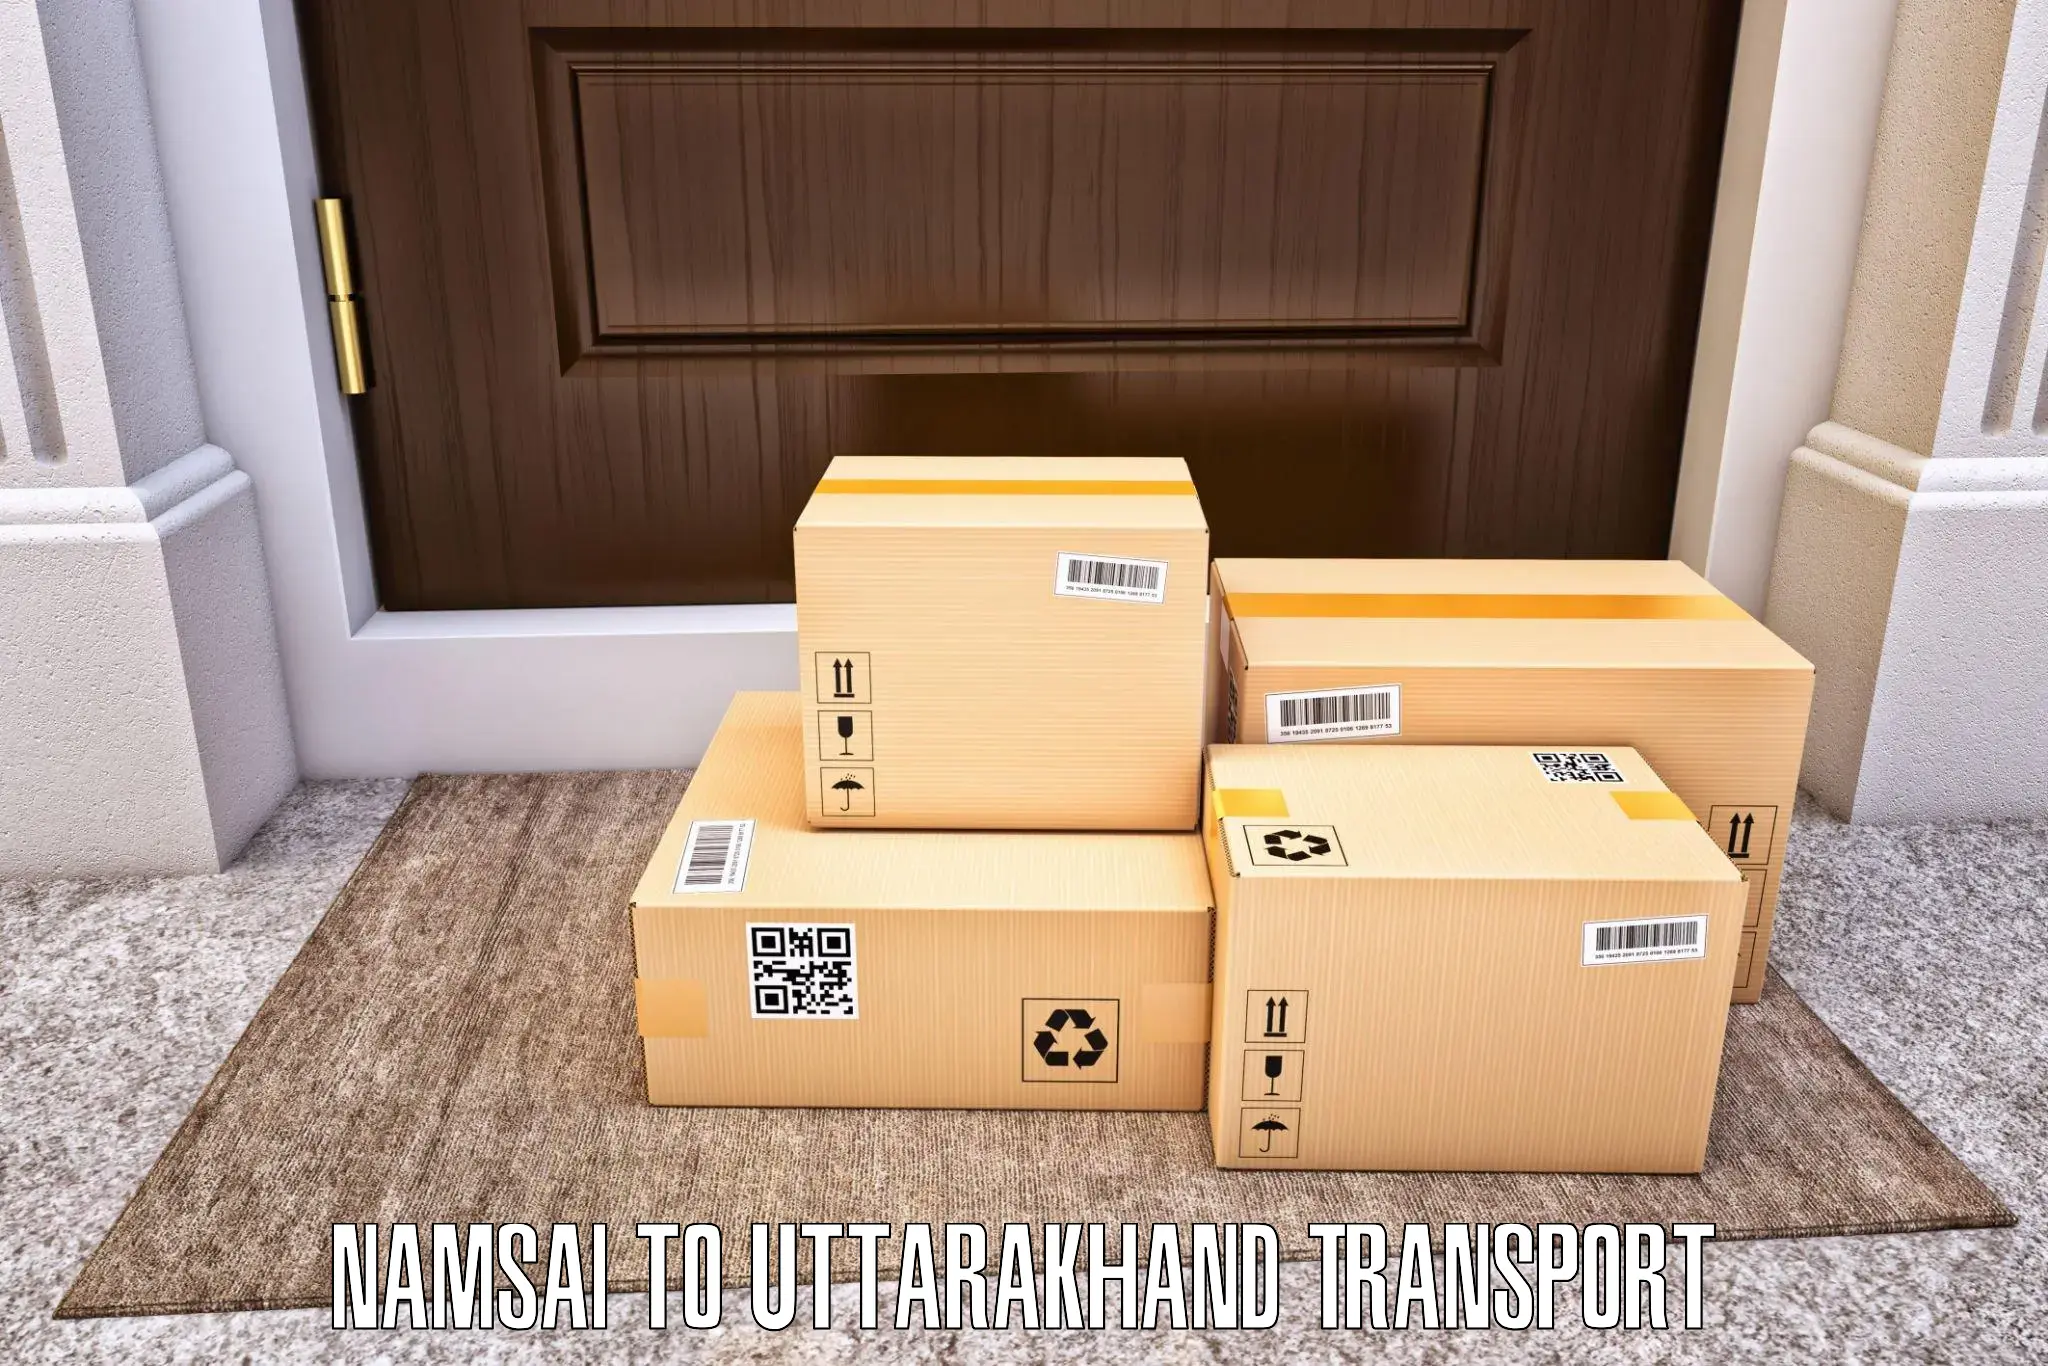 Domestic goods transportation services Namsai to Roorkee